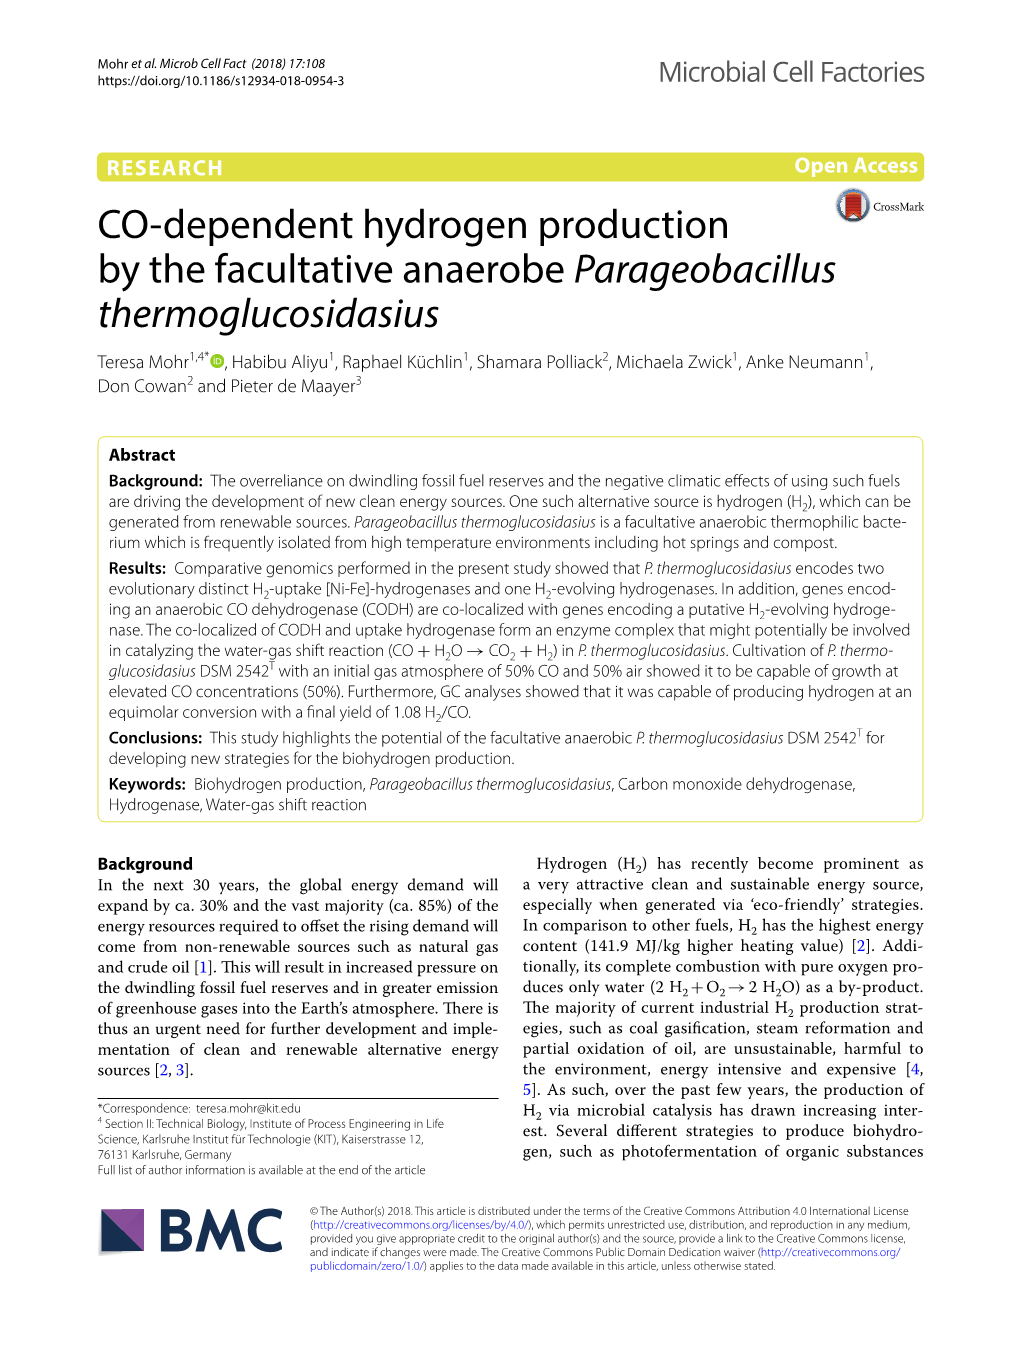 CO-Dependent Hydrogen Production by the Facultative Anaerobe Parageobacillus Thermoglucosidasius